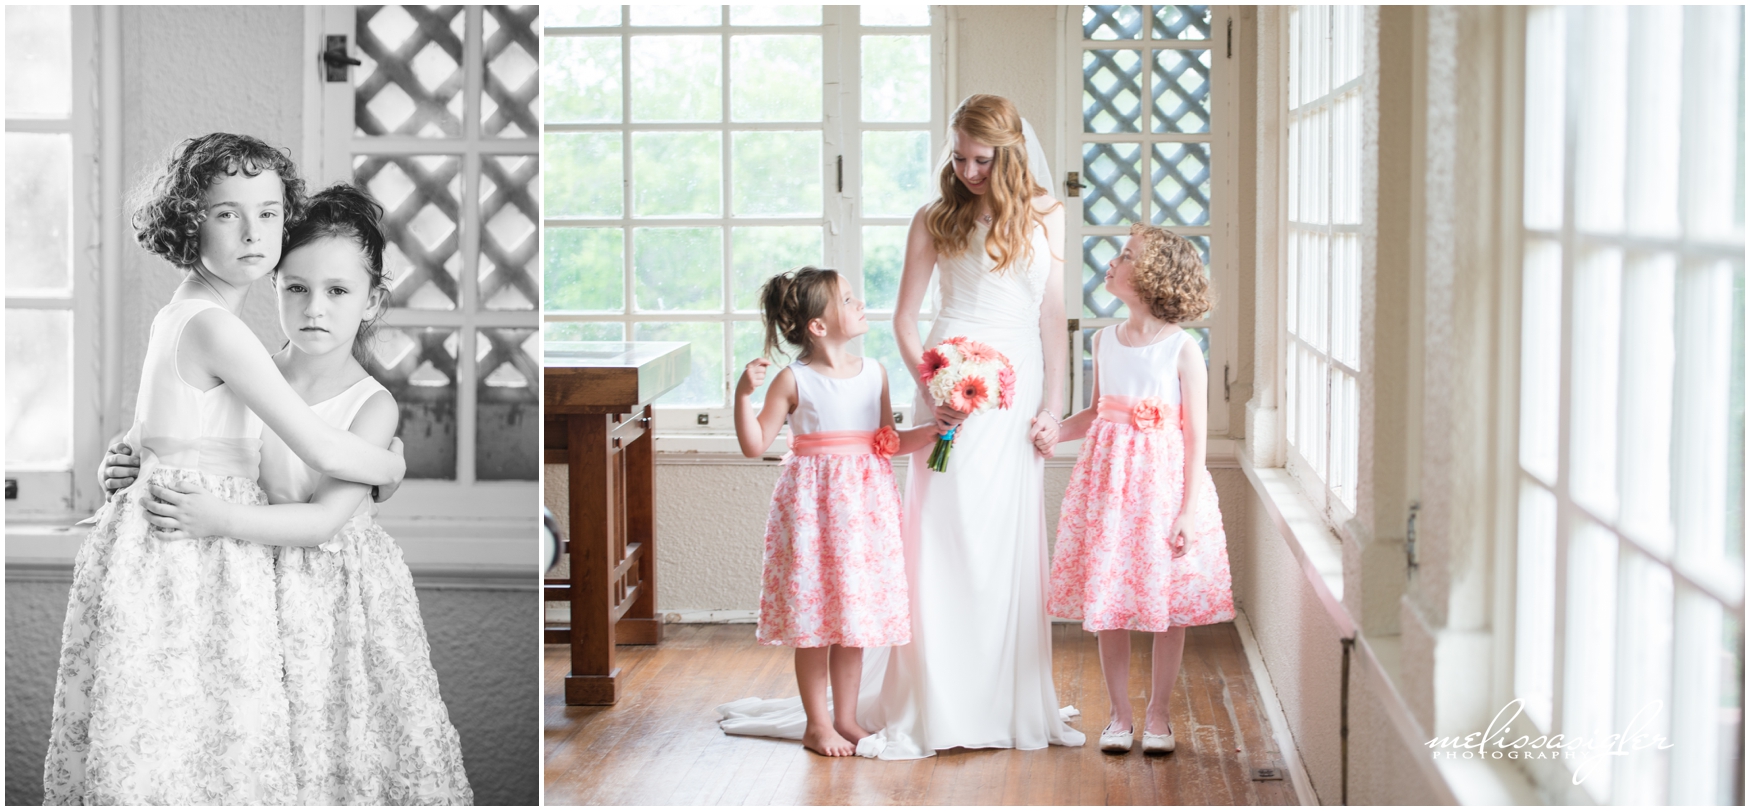 Bride and flower girls at Longview Mansion by Melissa Sigler Photography